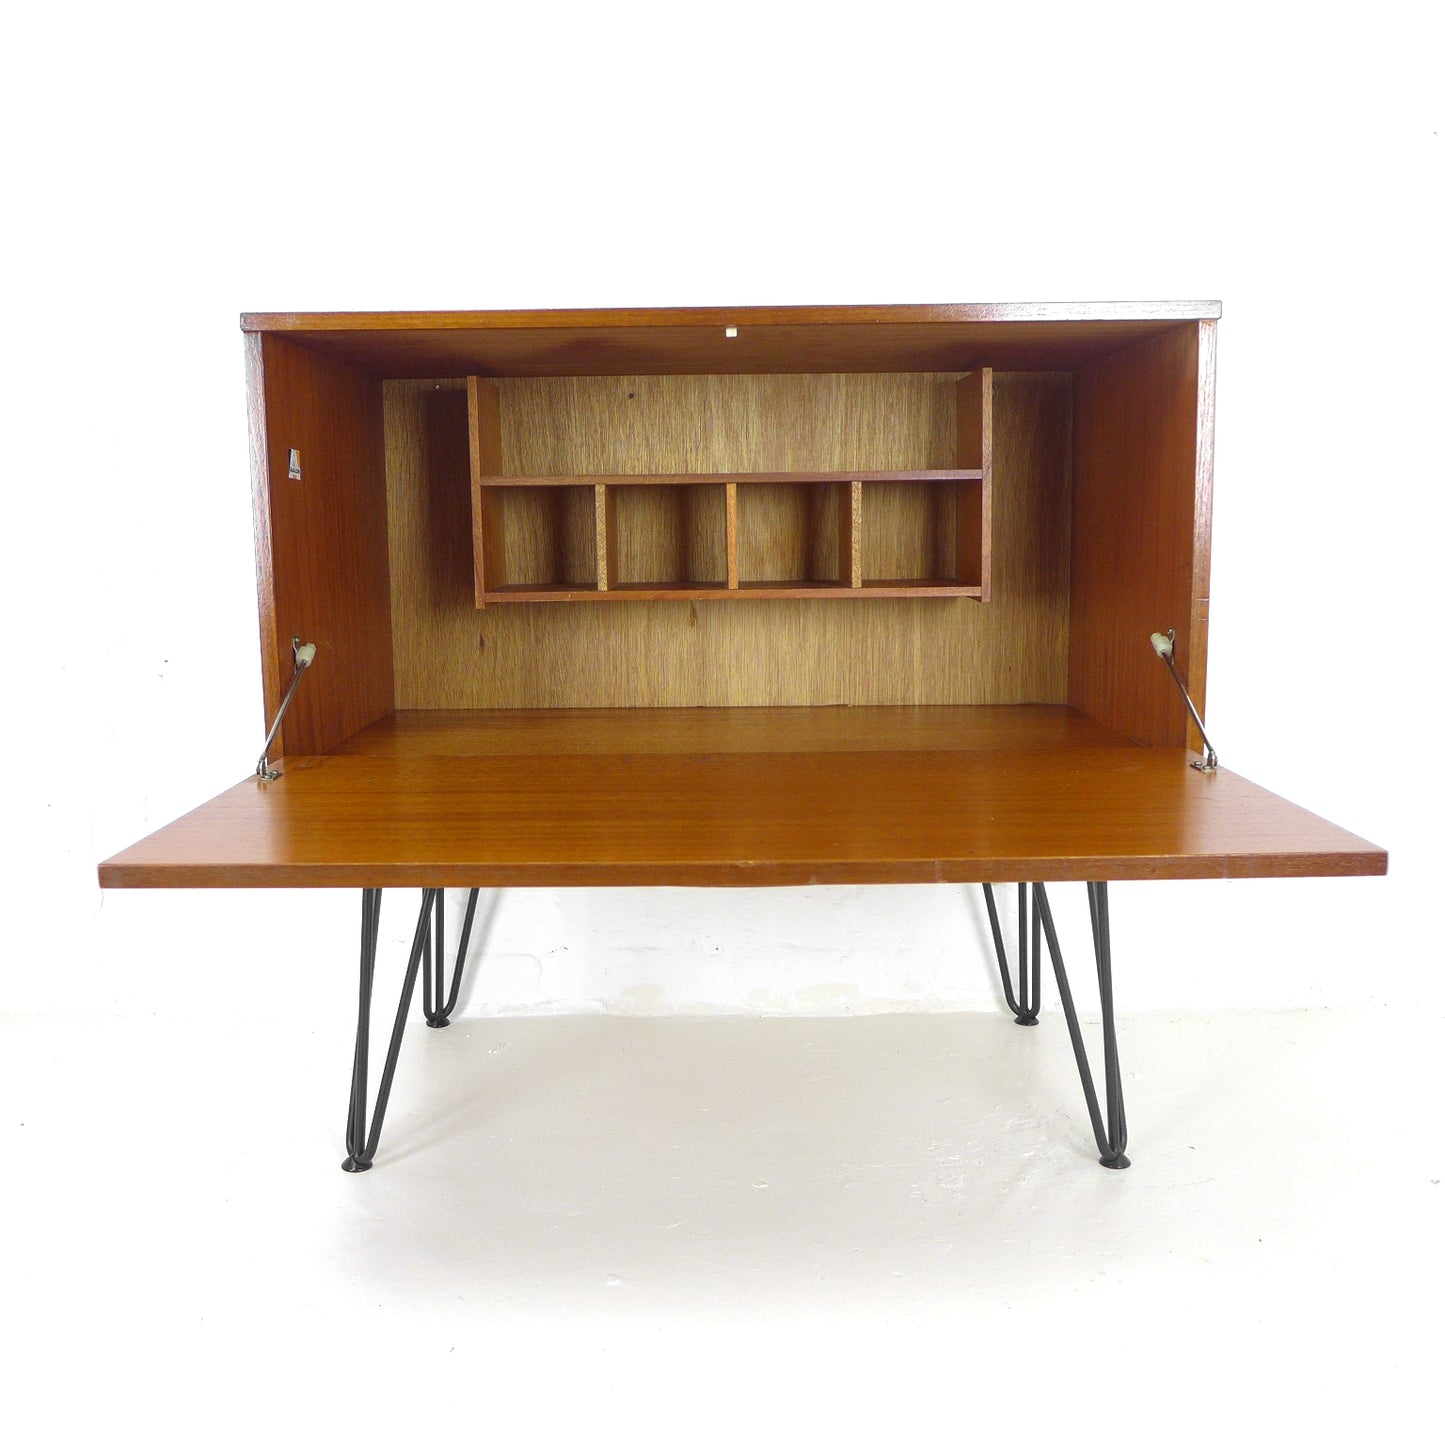 Pair of Mid Century Teak Record/Drinks Cabinets / Modular Sideboard on Hairpin Legs by Avalon